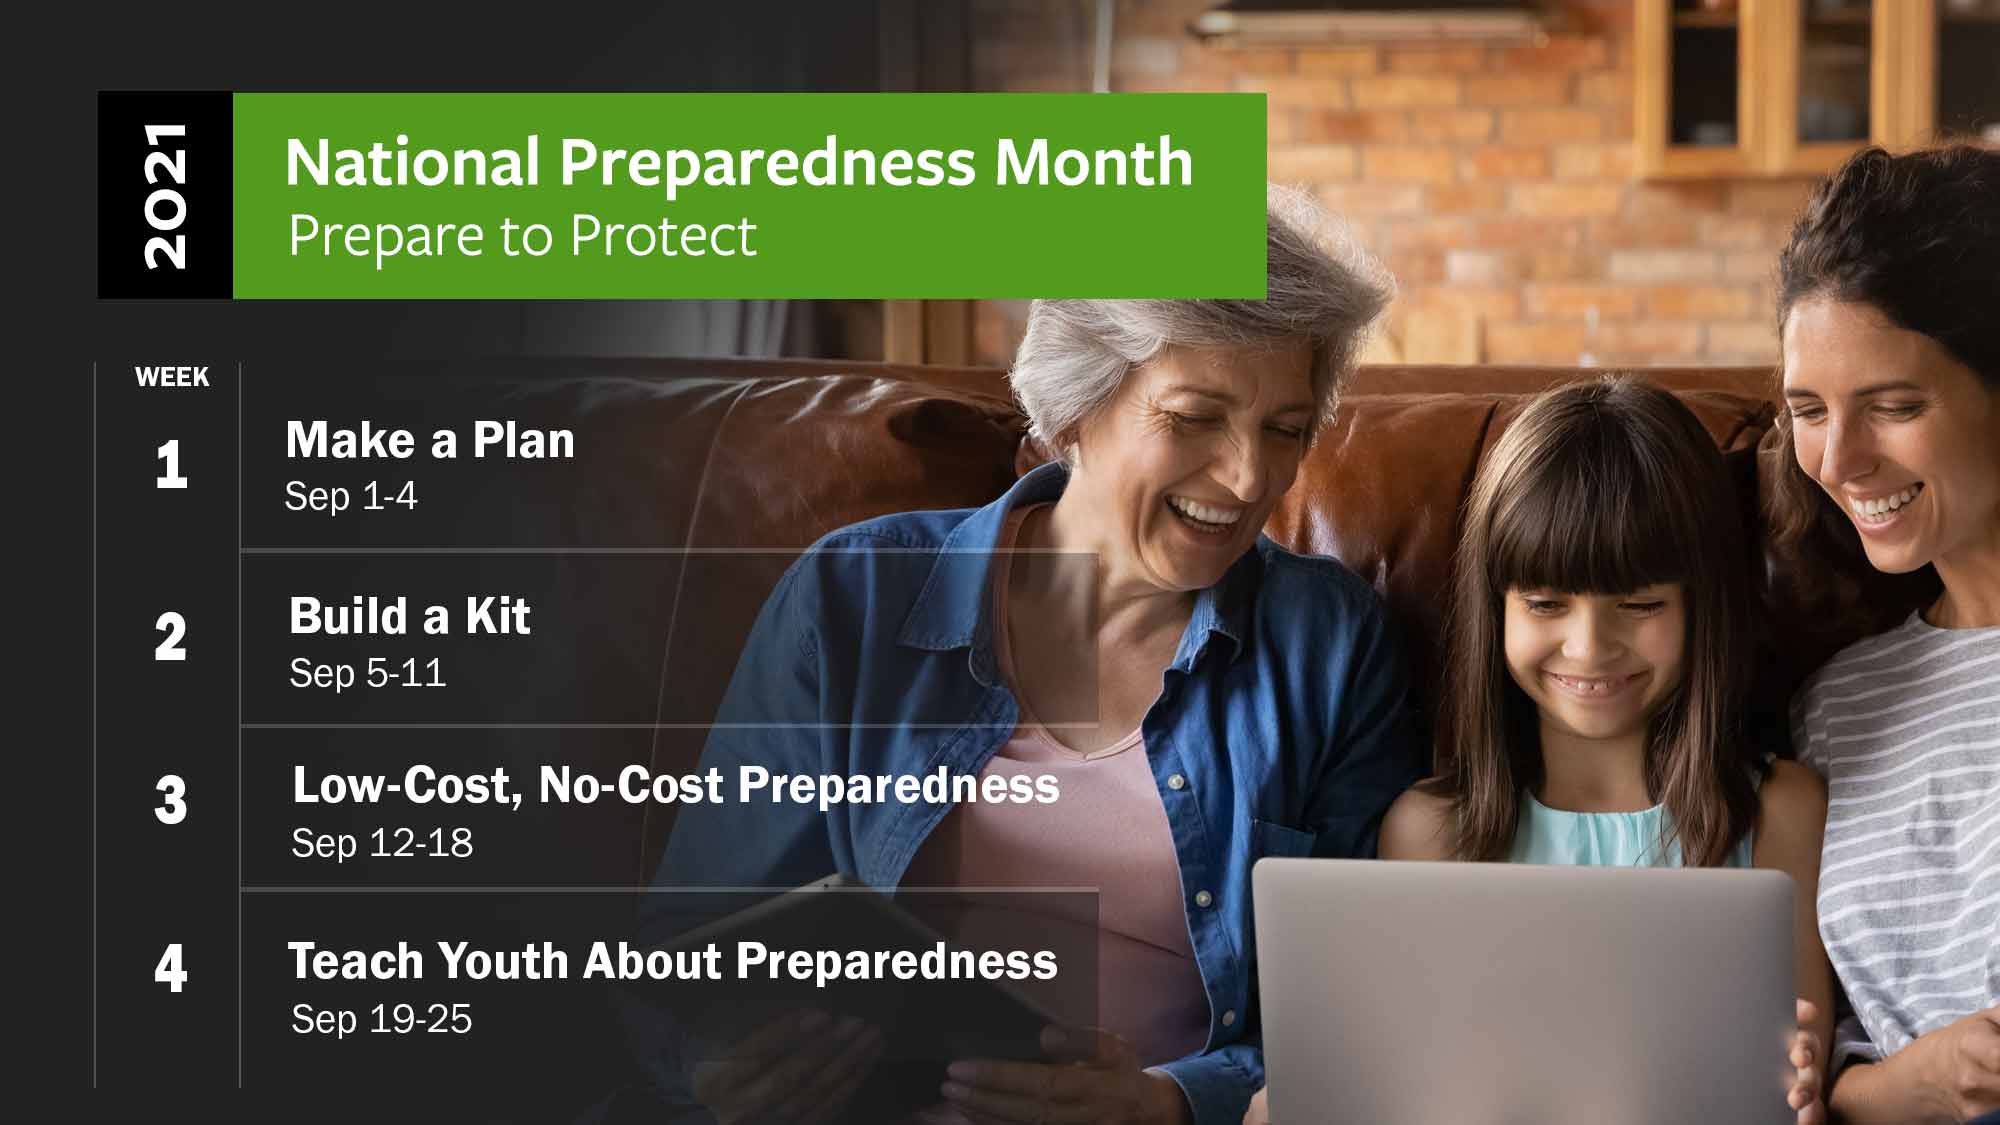 National Preparedness Month 2021, Prepare to Protect. Week 1: Make a Plan, Week 2: Build a kit. Week 3: Low-Cost, No-Cost Preparedness. Week 4: Teach Youth About Preparedness.